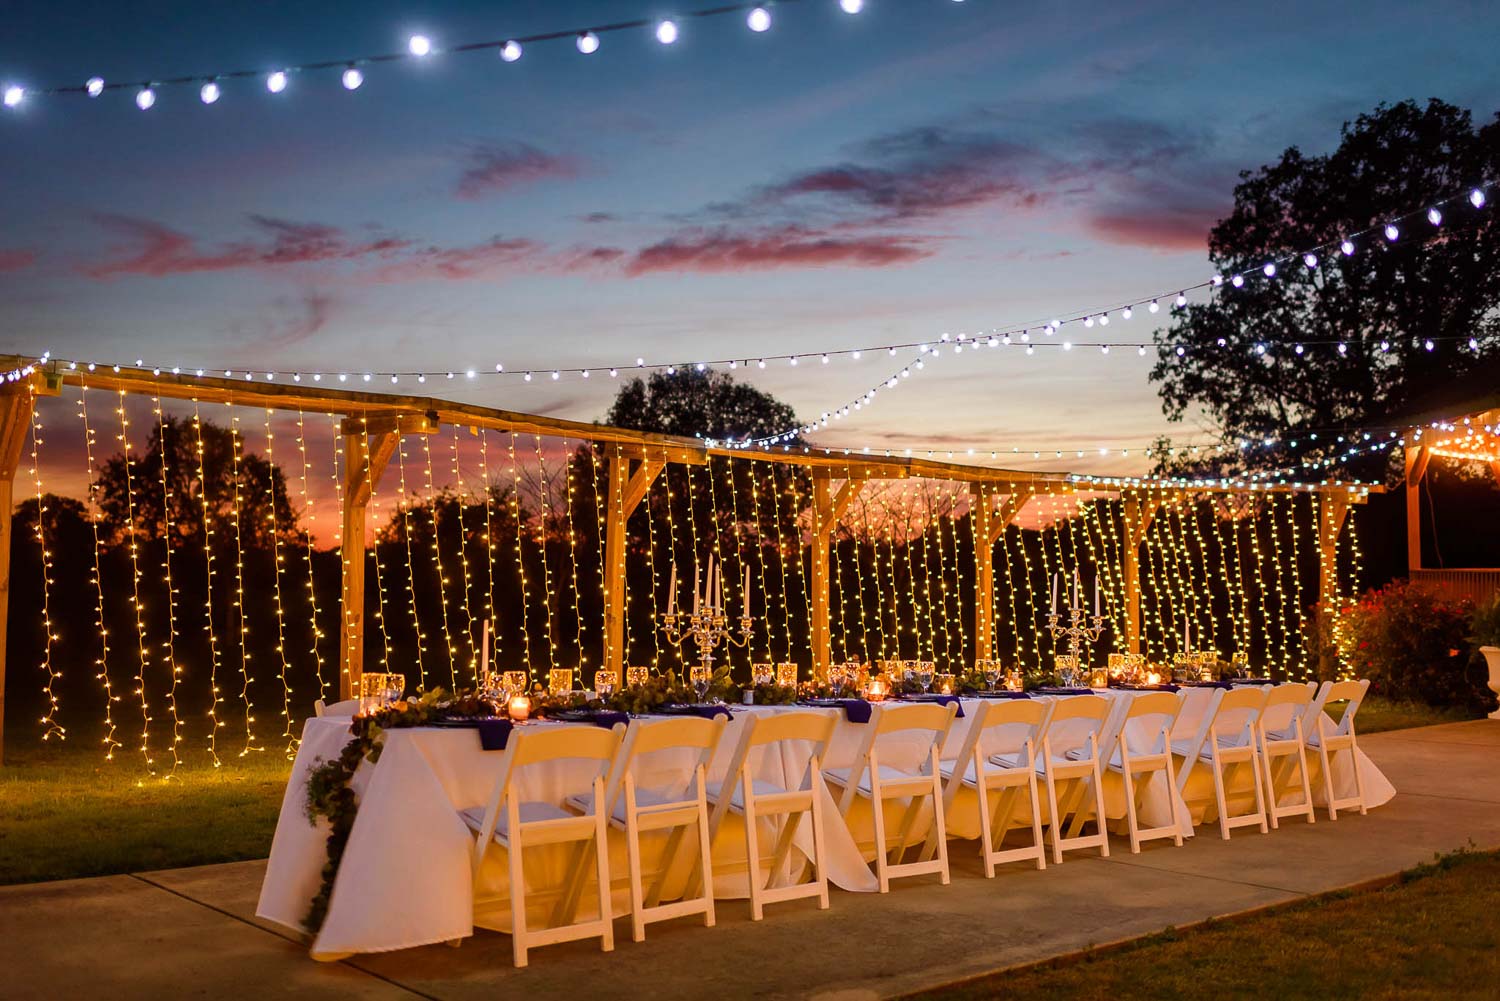 outdoor wedding reception with string lights at sunset in Trenton GA at Sunrise Farm